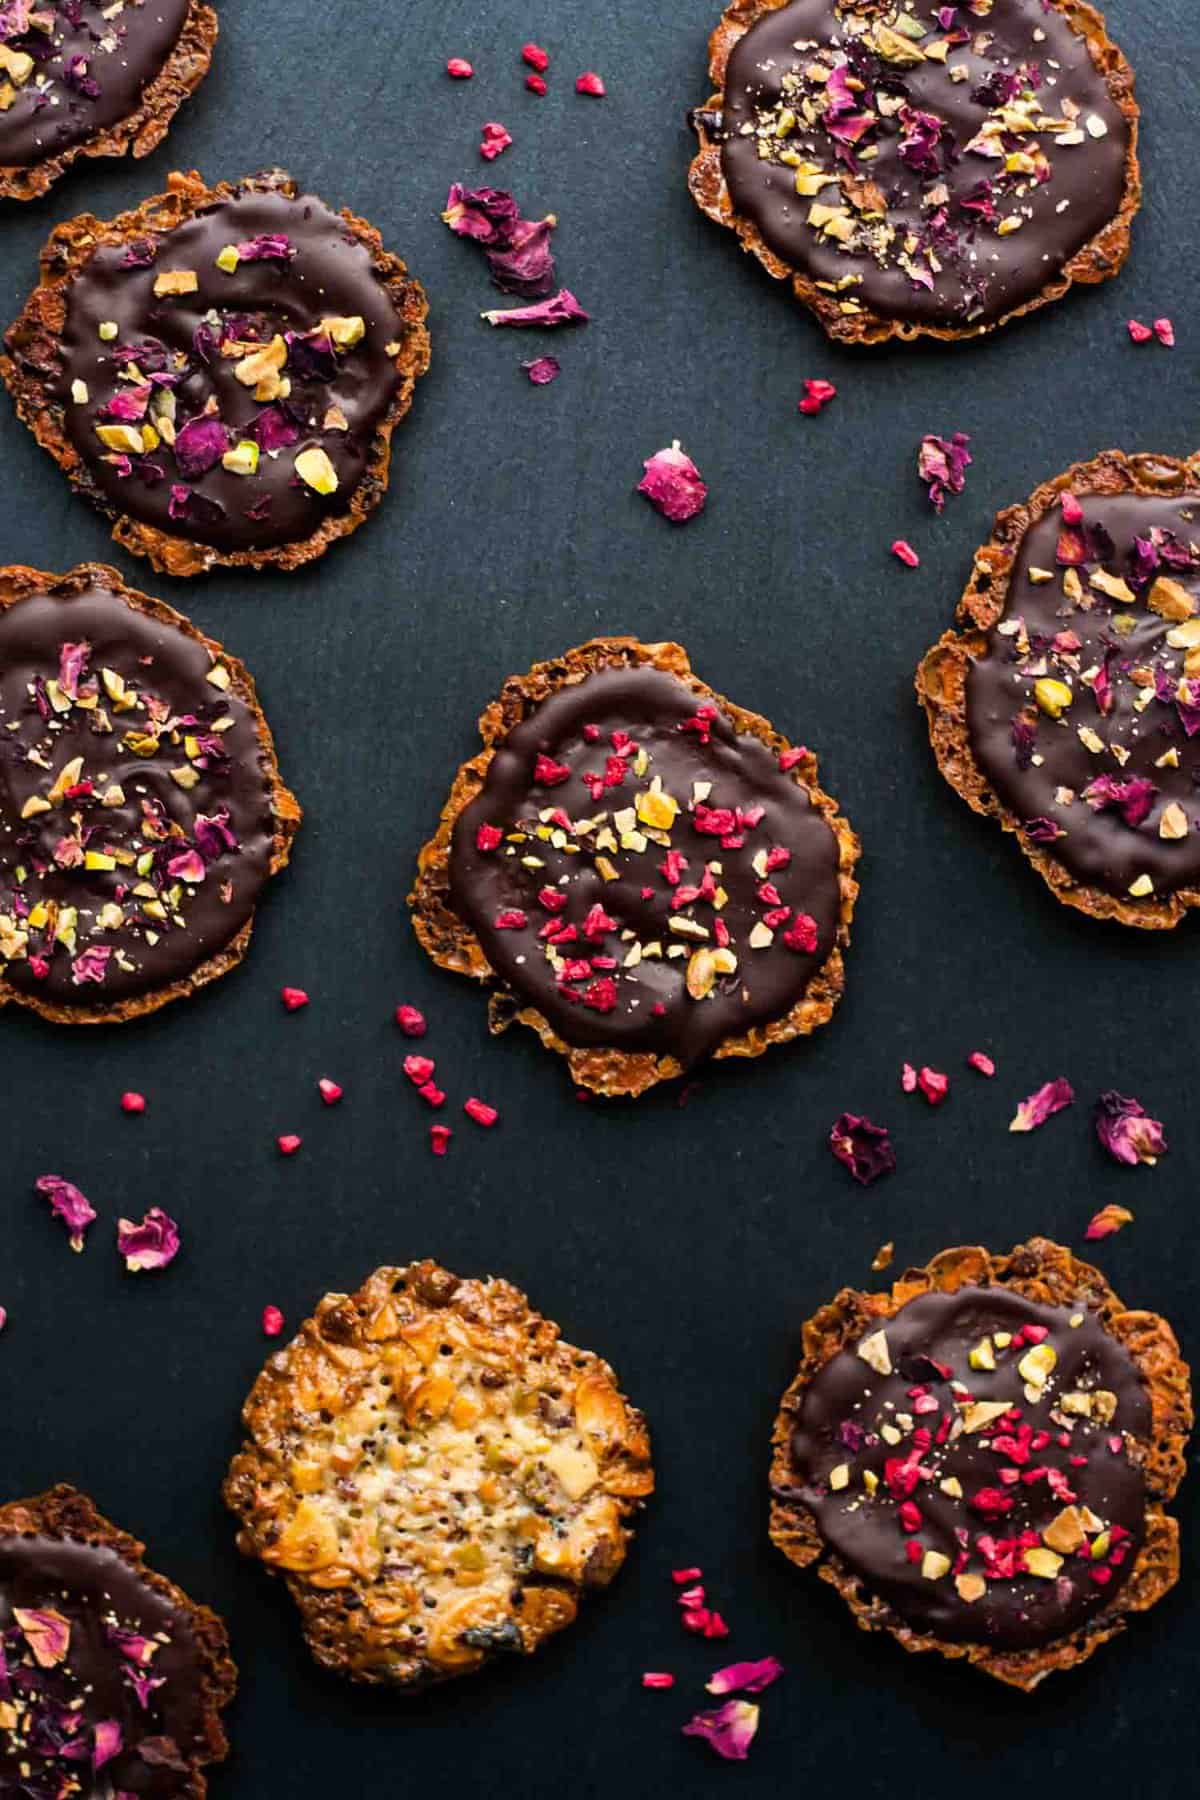 Raspberry Pistachio Almond Florentines - why not get baking and make these indulgent treats for Valentine's Day? | eatloveeats.com